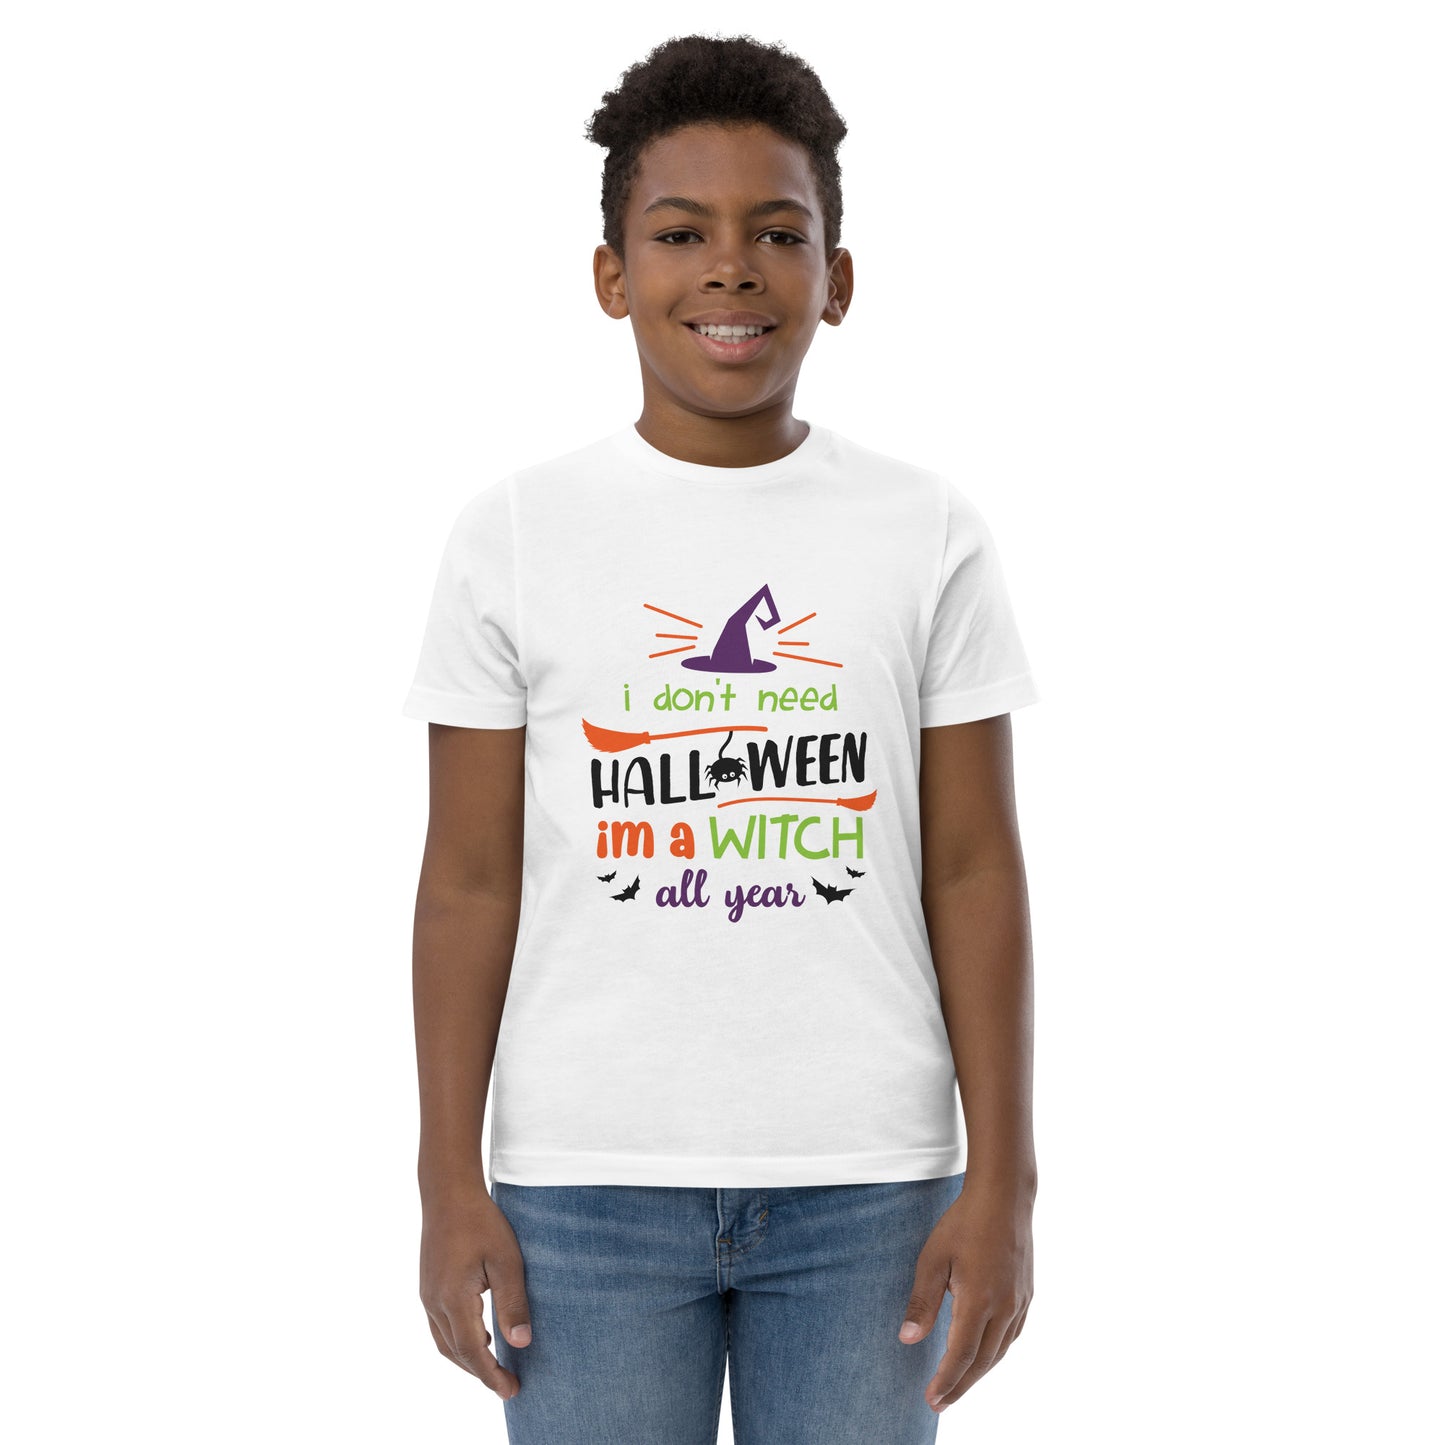 I'm a Witch All Year Youth jersey t-shirt